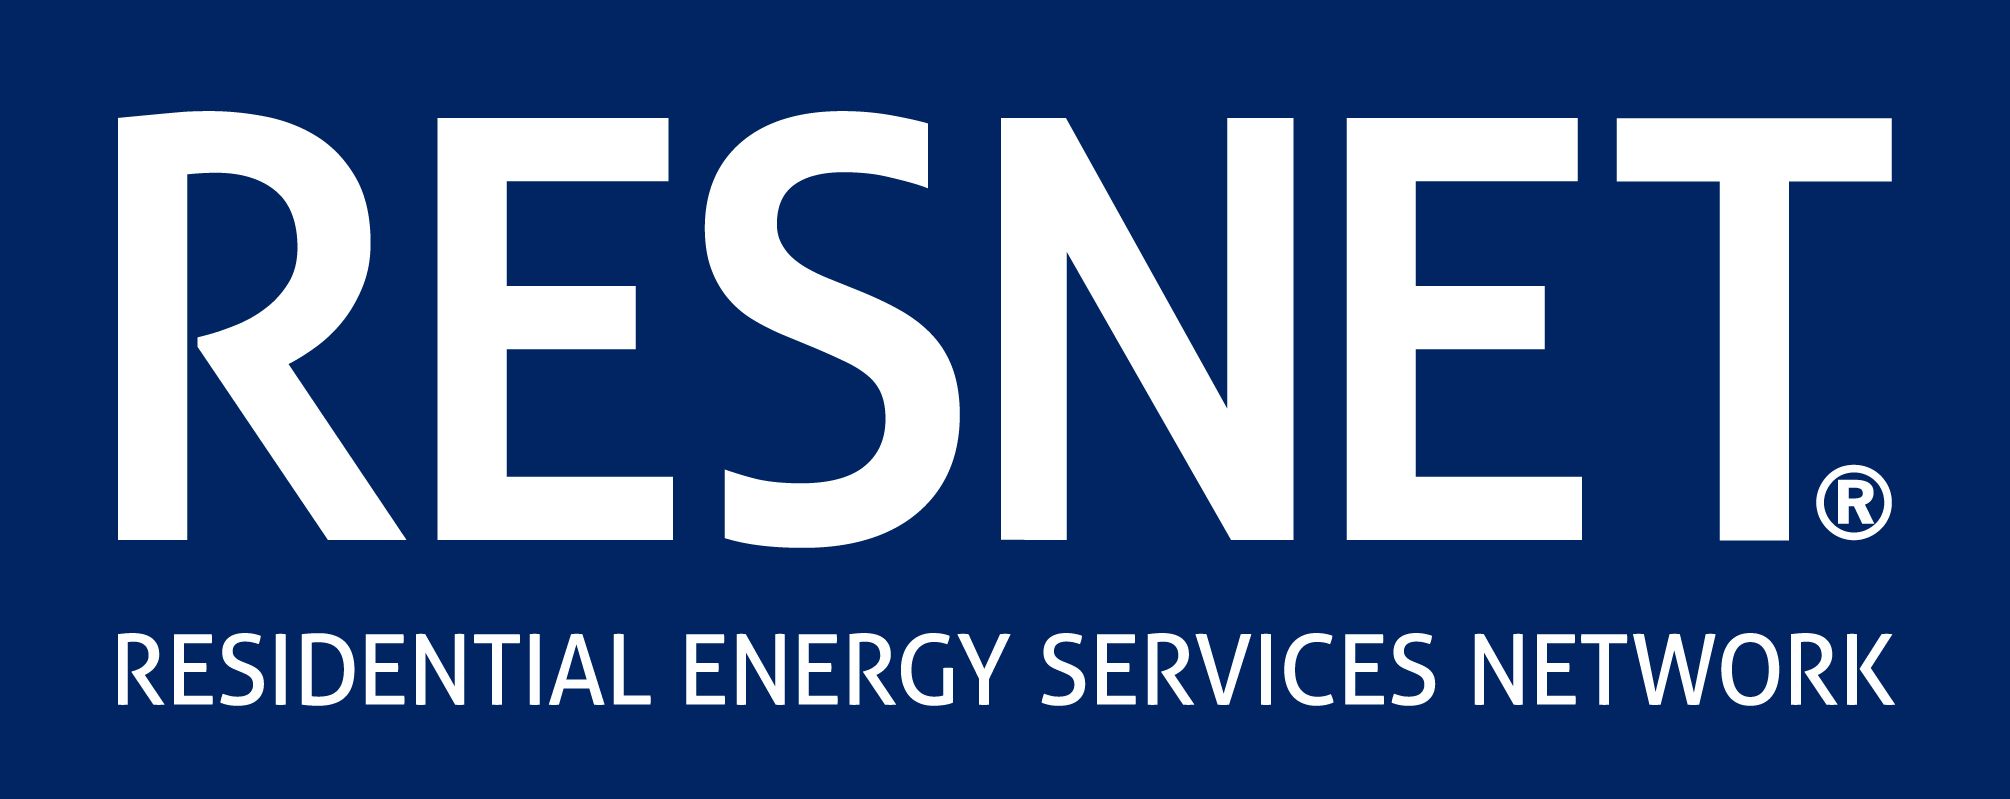 resnet-highlights-changes-to-45l-tax-credit-and-energy-star-for-single